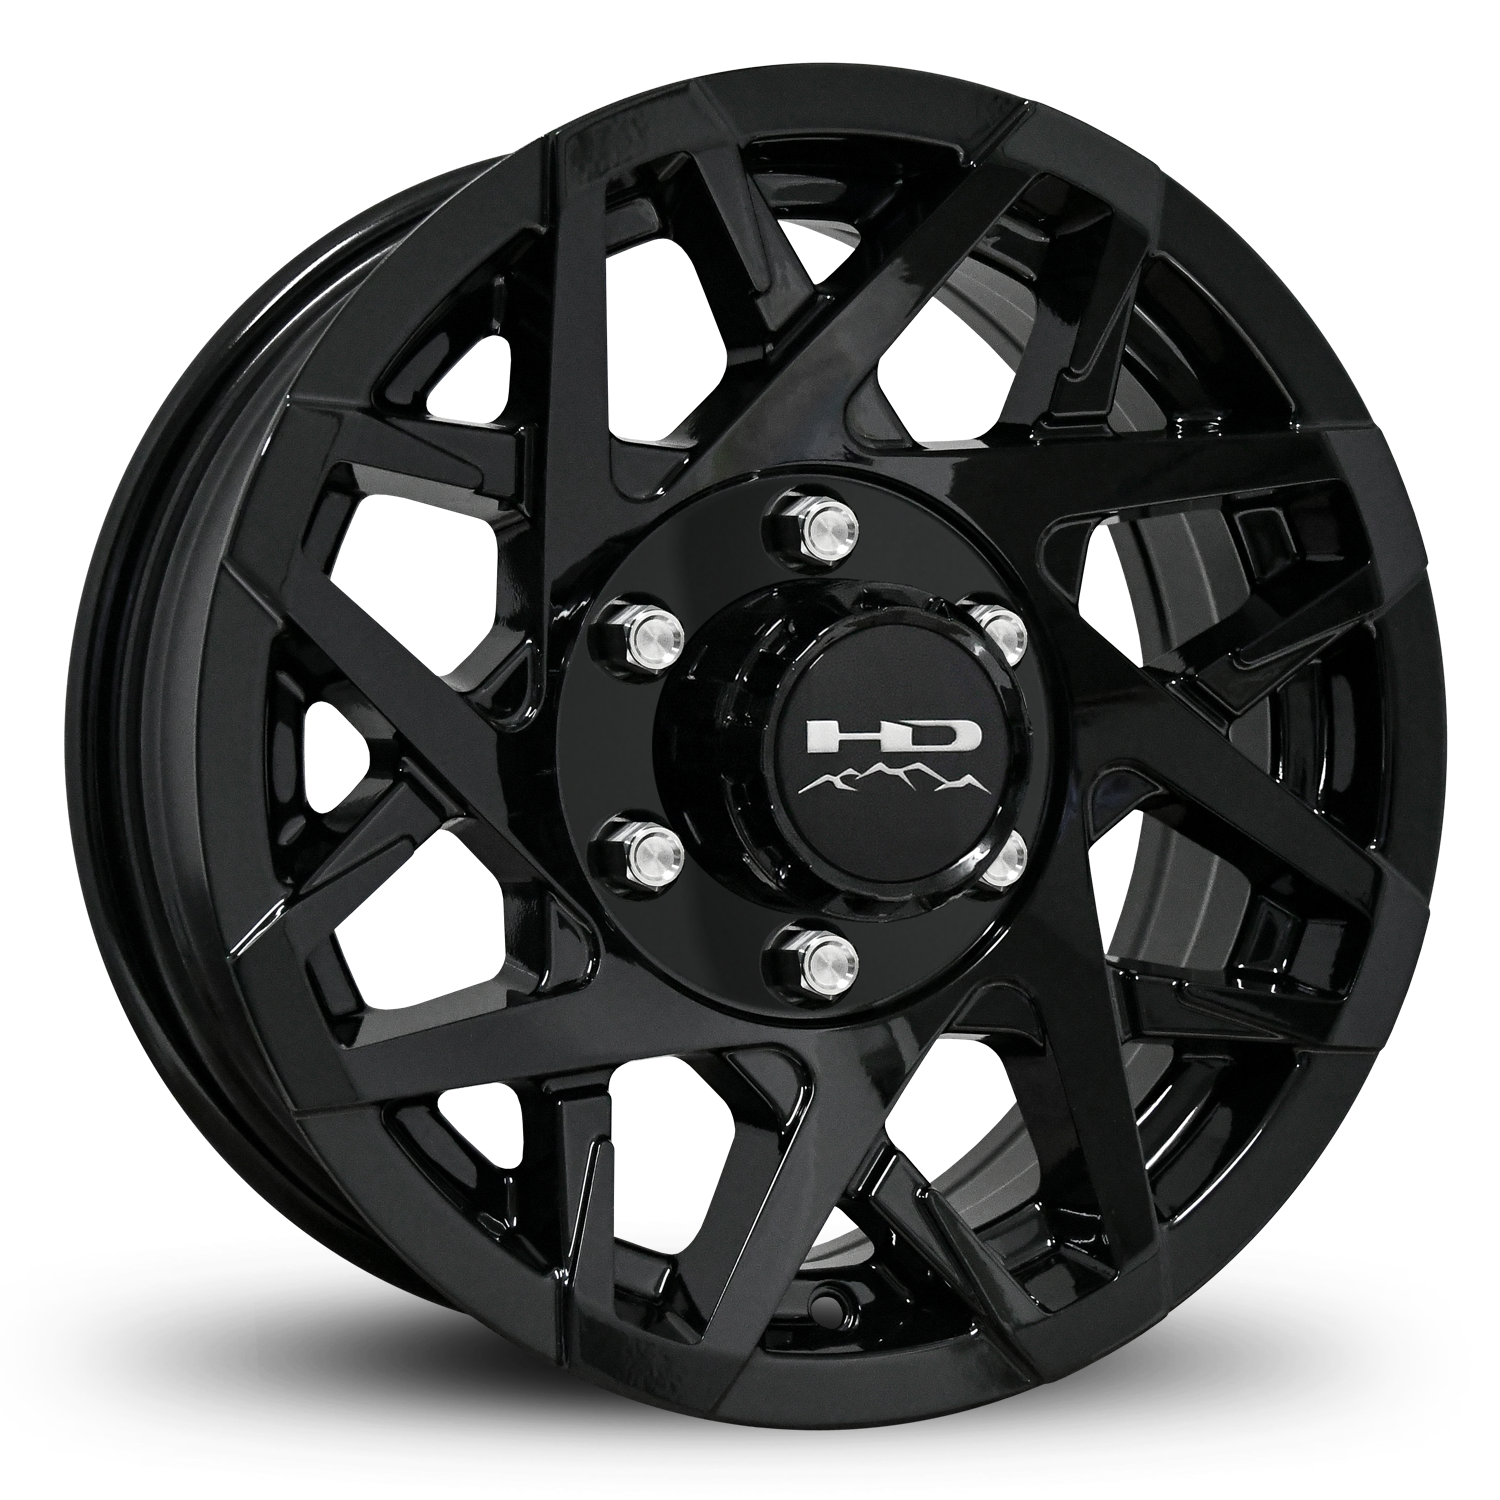 HD Off-Road Canyon Custom Trailer Wheel Rims in 15x6.0 15x6 All Gloss Black with Center Cap & Logo fits 6x5.50 / 6x139.7 Axle Boat, Car, RV, Travel, Concession, Horse, Utility, Lawn & Garden, & Landscaping.